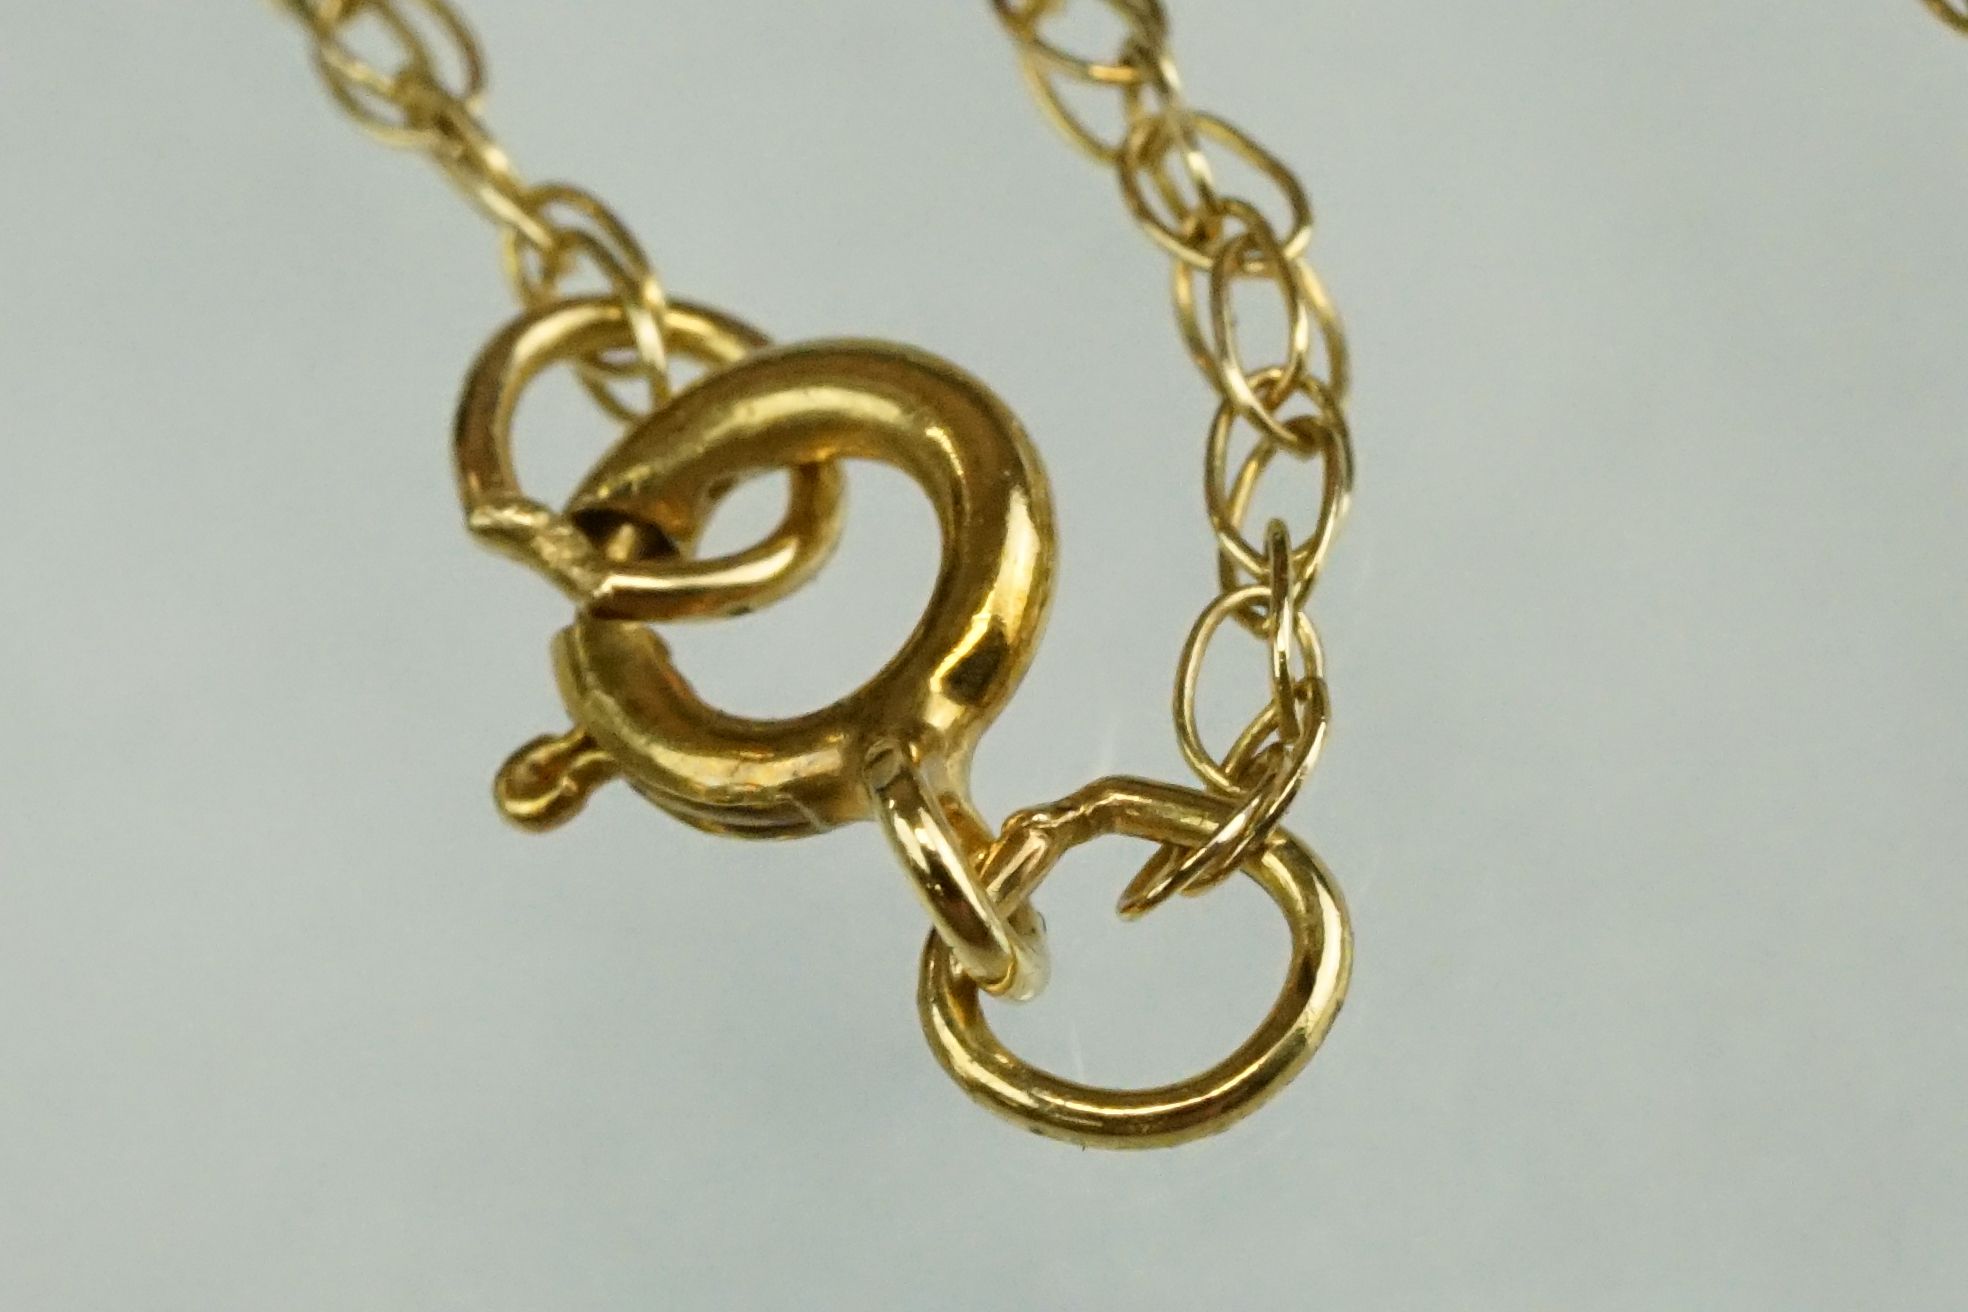 9ct yellow and white gold set gold heart shaped locket pendant, the lock with rose decoration in - Image 7 of 14